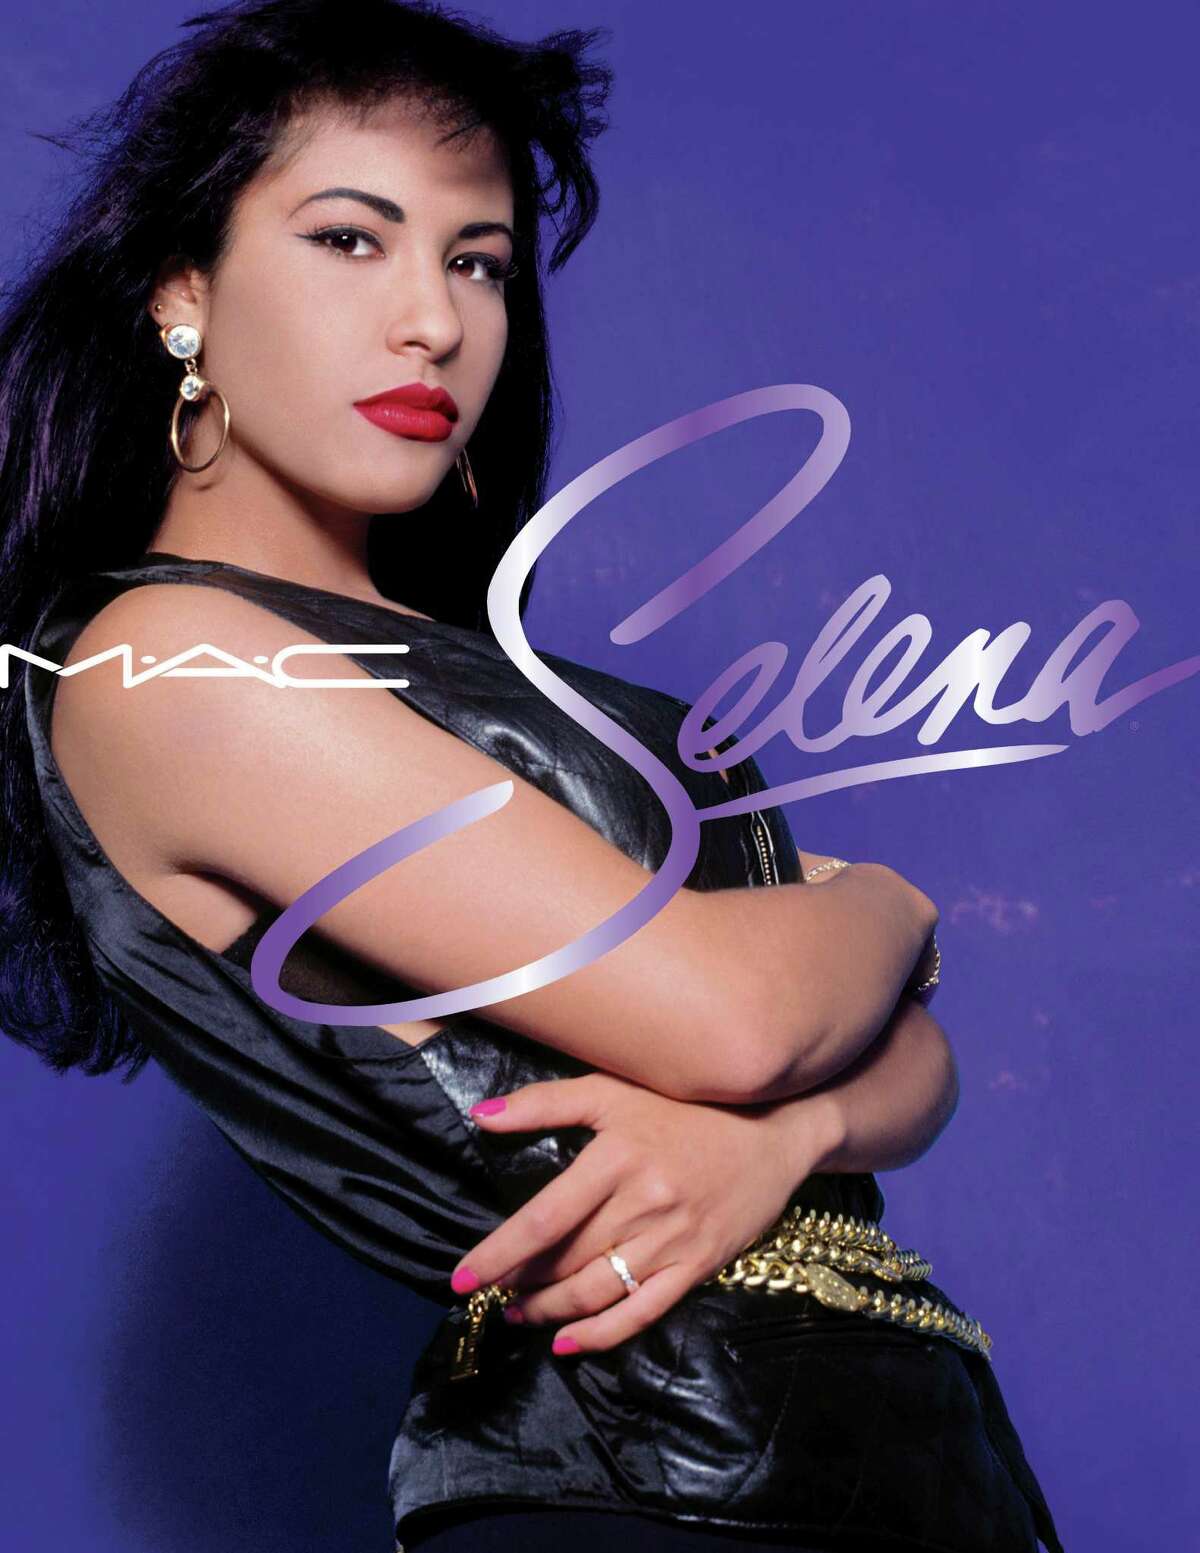 The 14-piece MAC Selena collection includes lipticks, eyeshadows, mascara and more priced from $17 to $35, all encapsulated in Selena’s favorite purple hue.